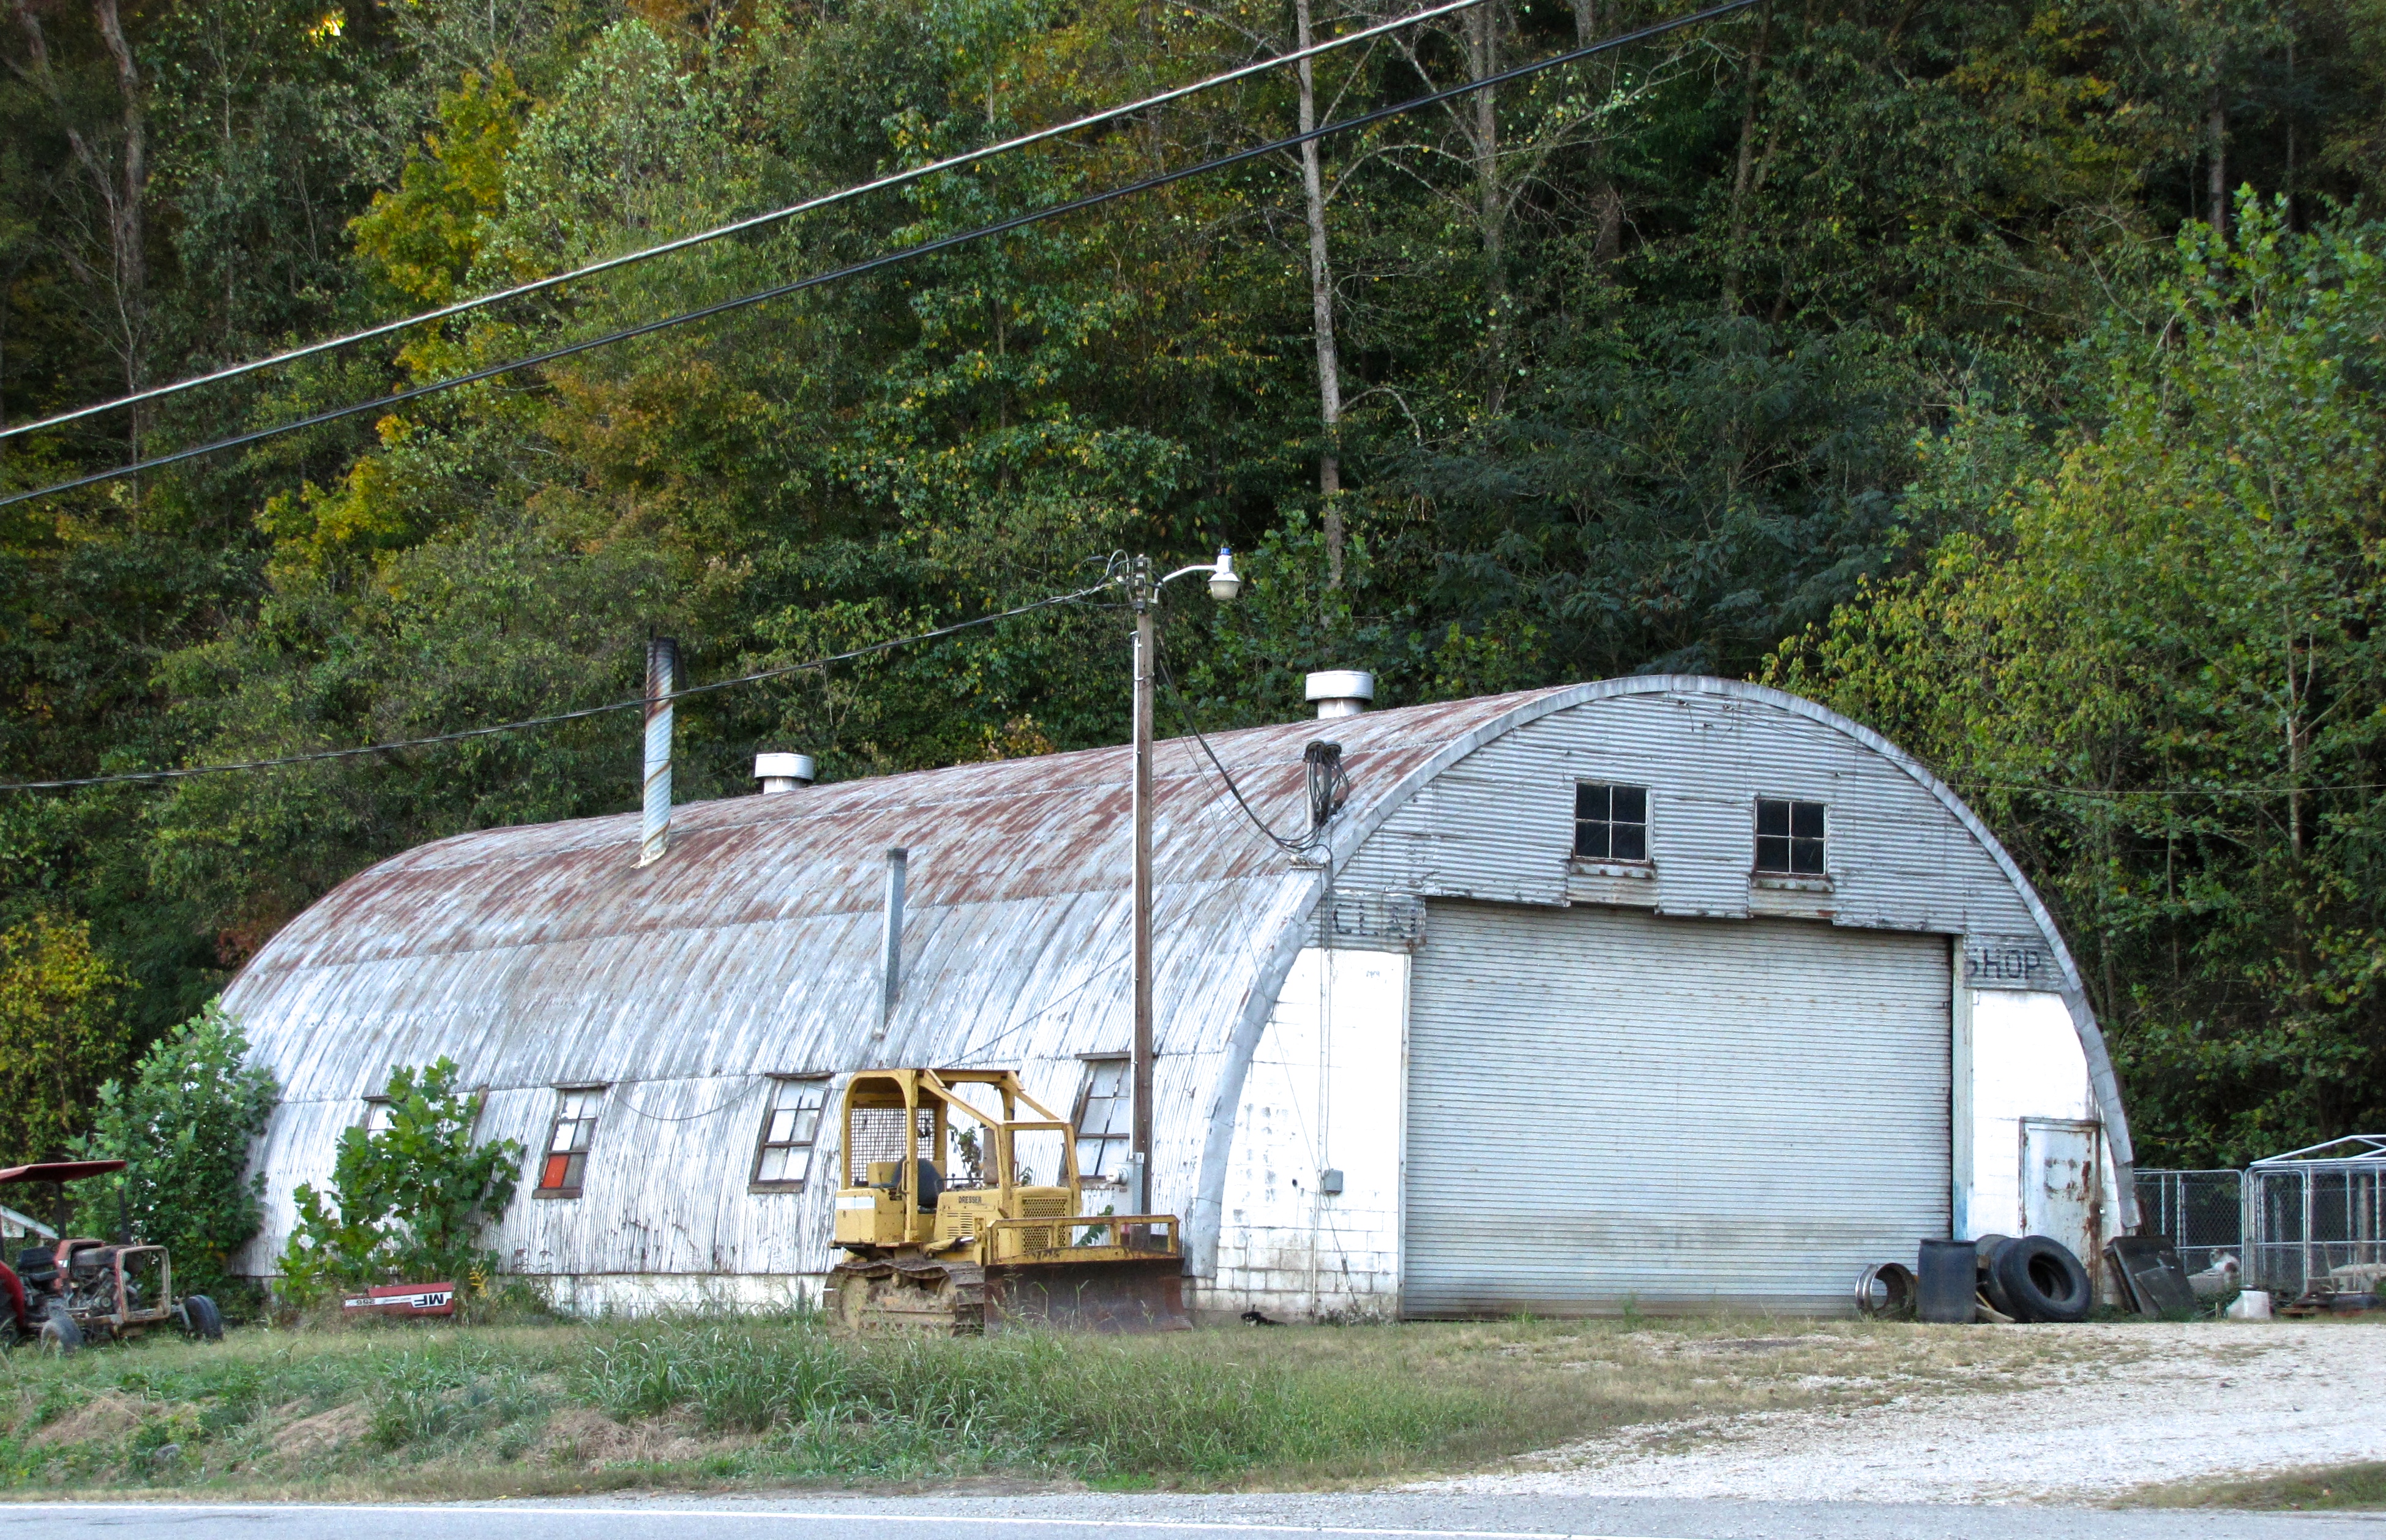 quonset hut in Fort Thomas, KY